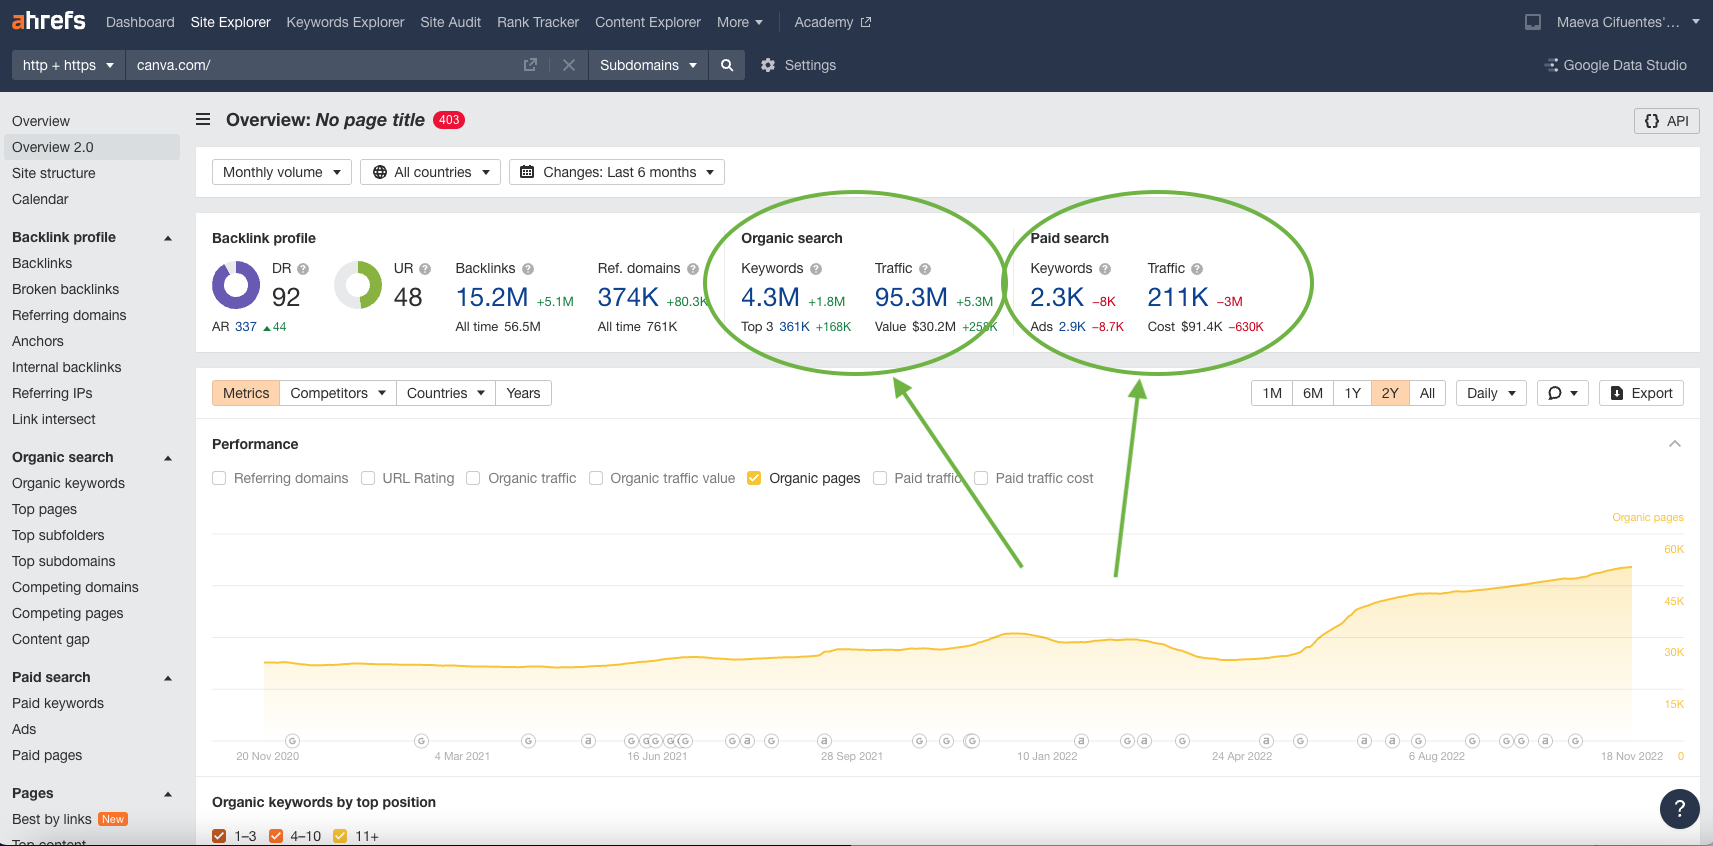  Ahrefs dashboard showing metrics for the website Canva